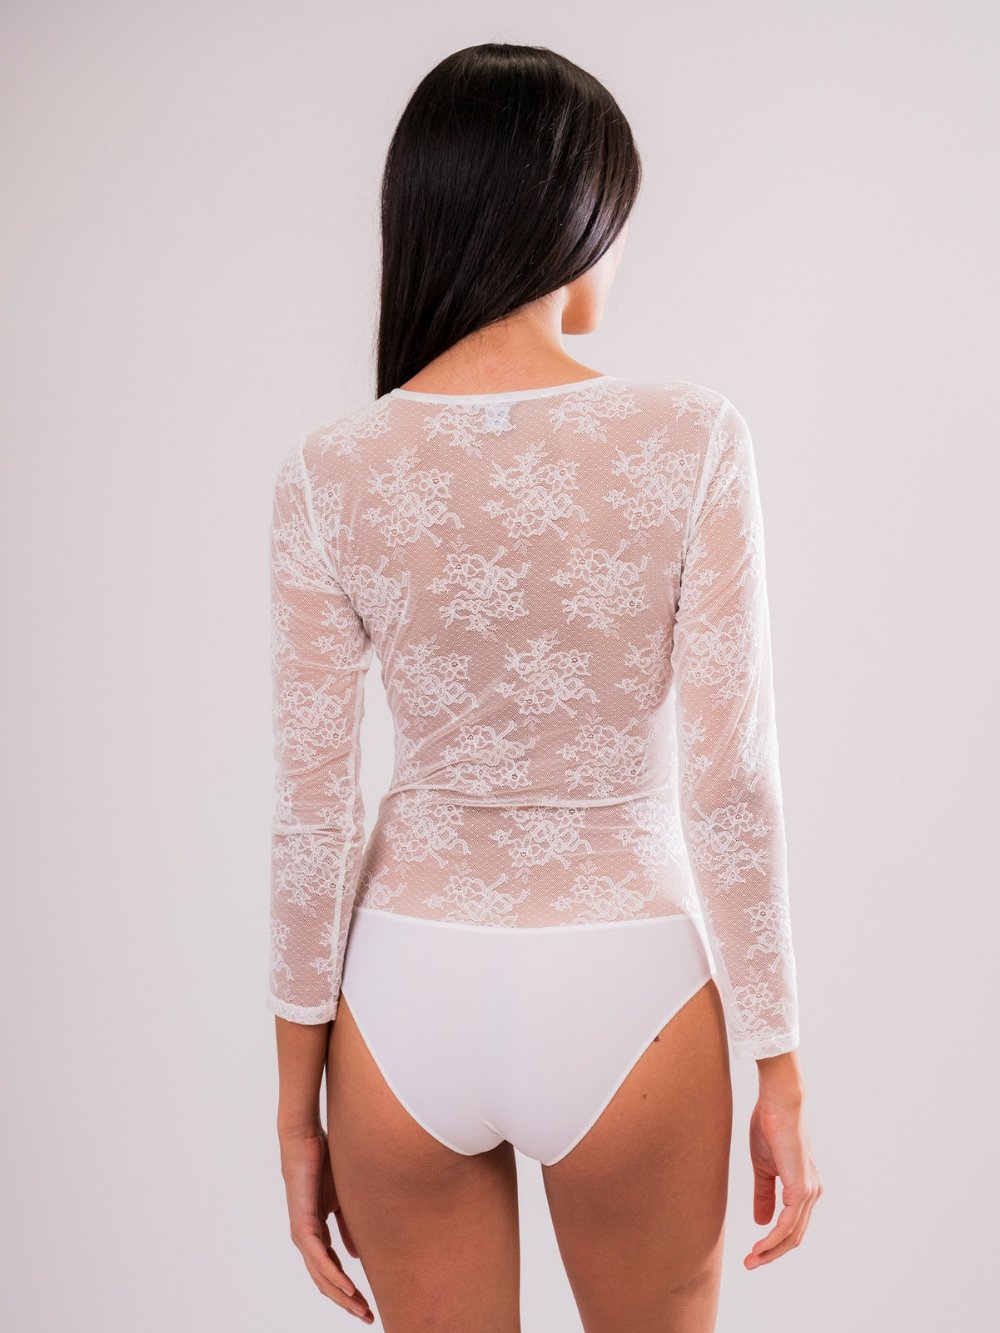 Long Sleeve Body in White Lace - Caramì Lingerie Made in Italy